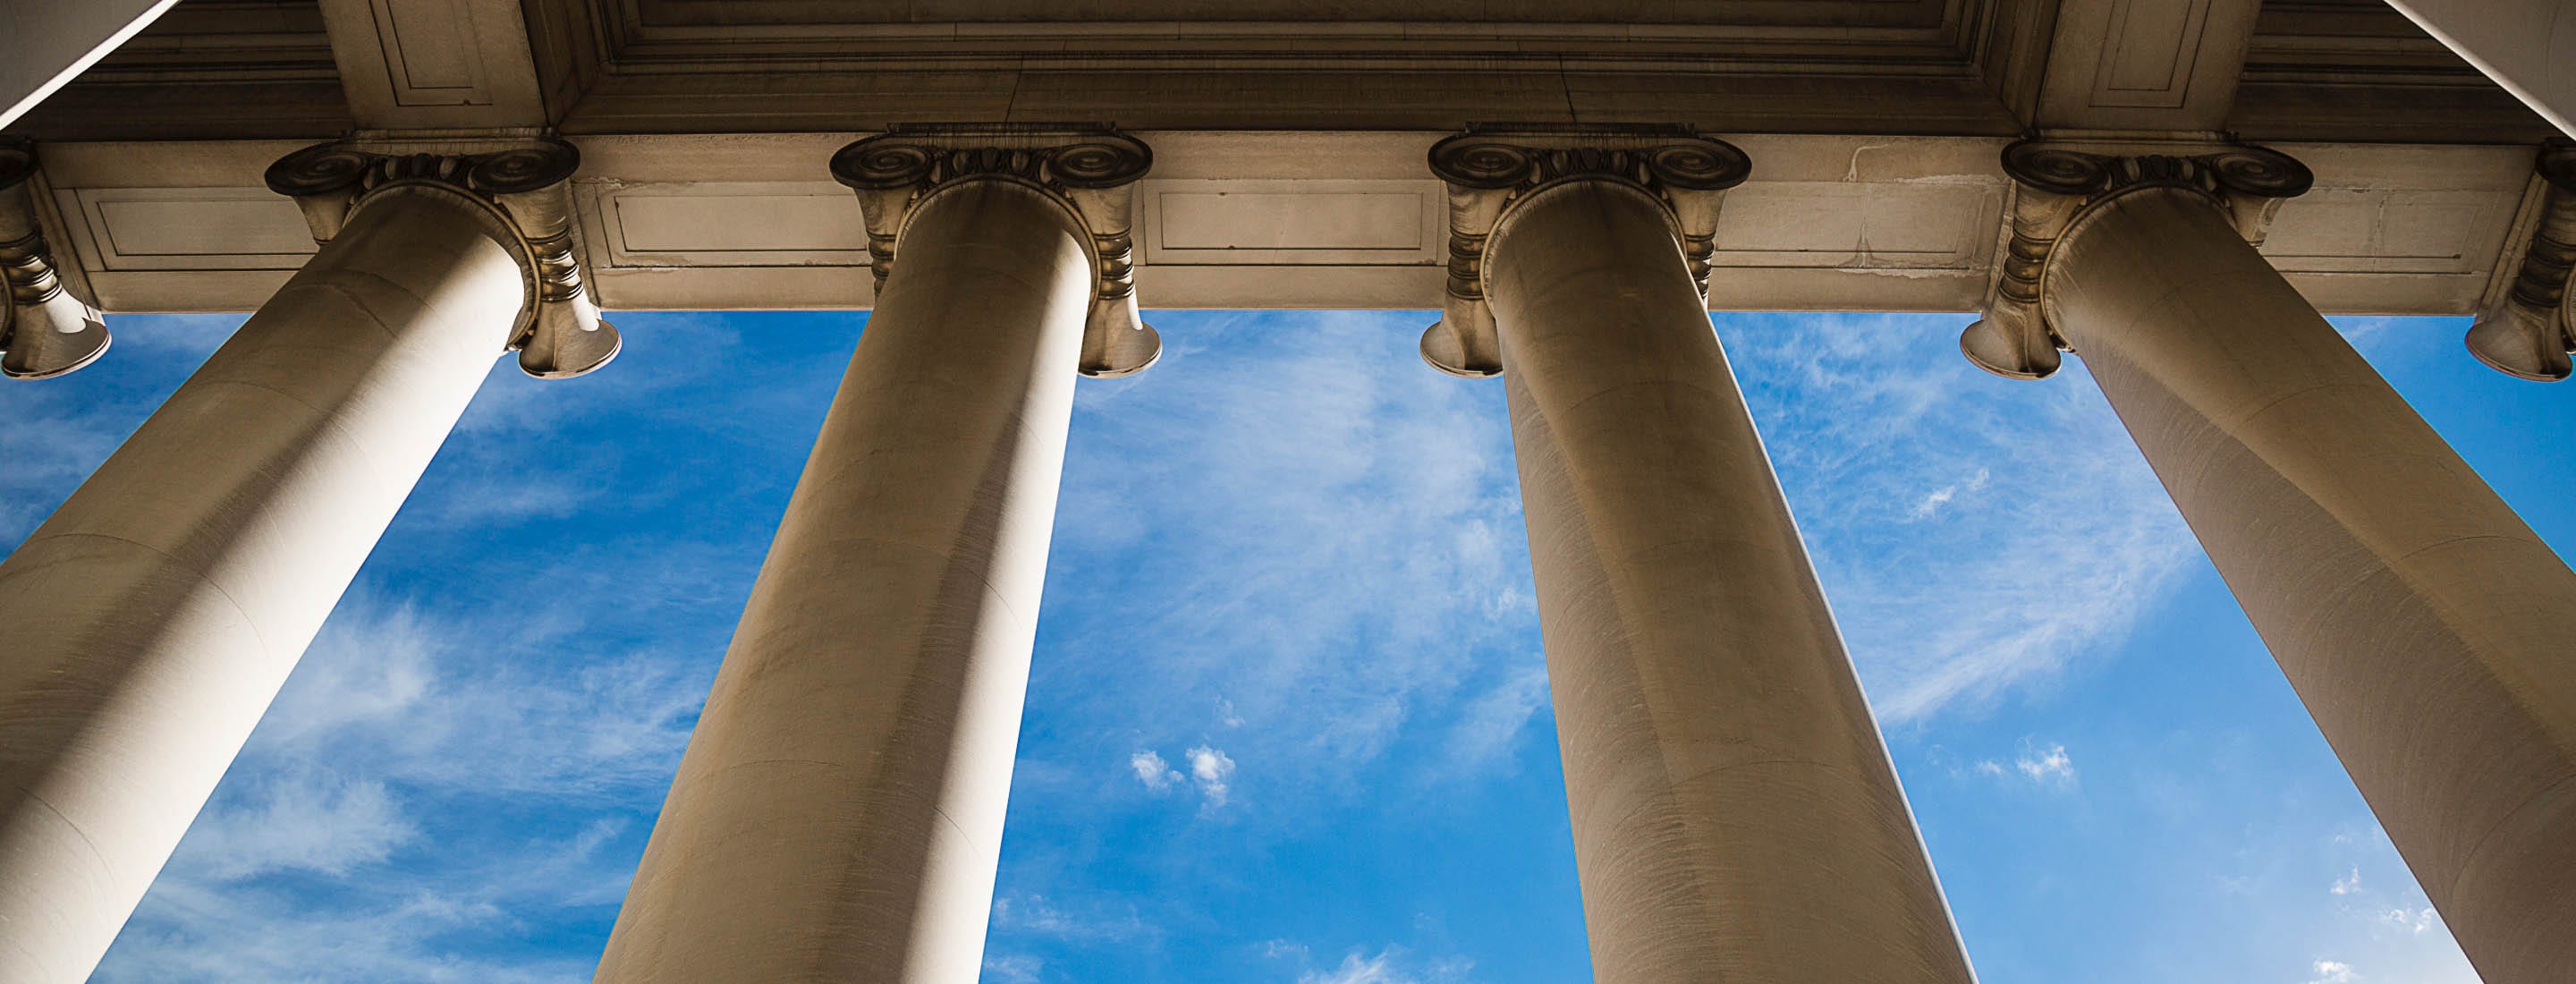 First Amendment Banner - courthouse columns looking up into blue sky